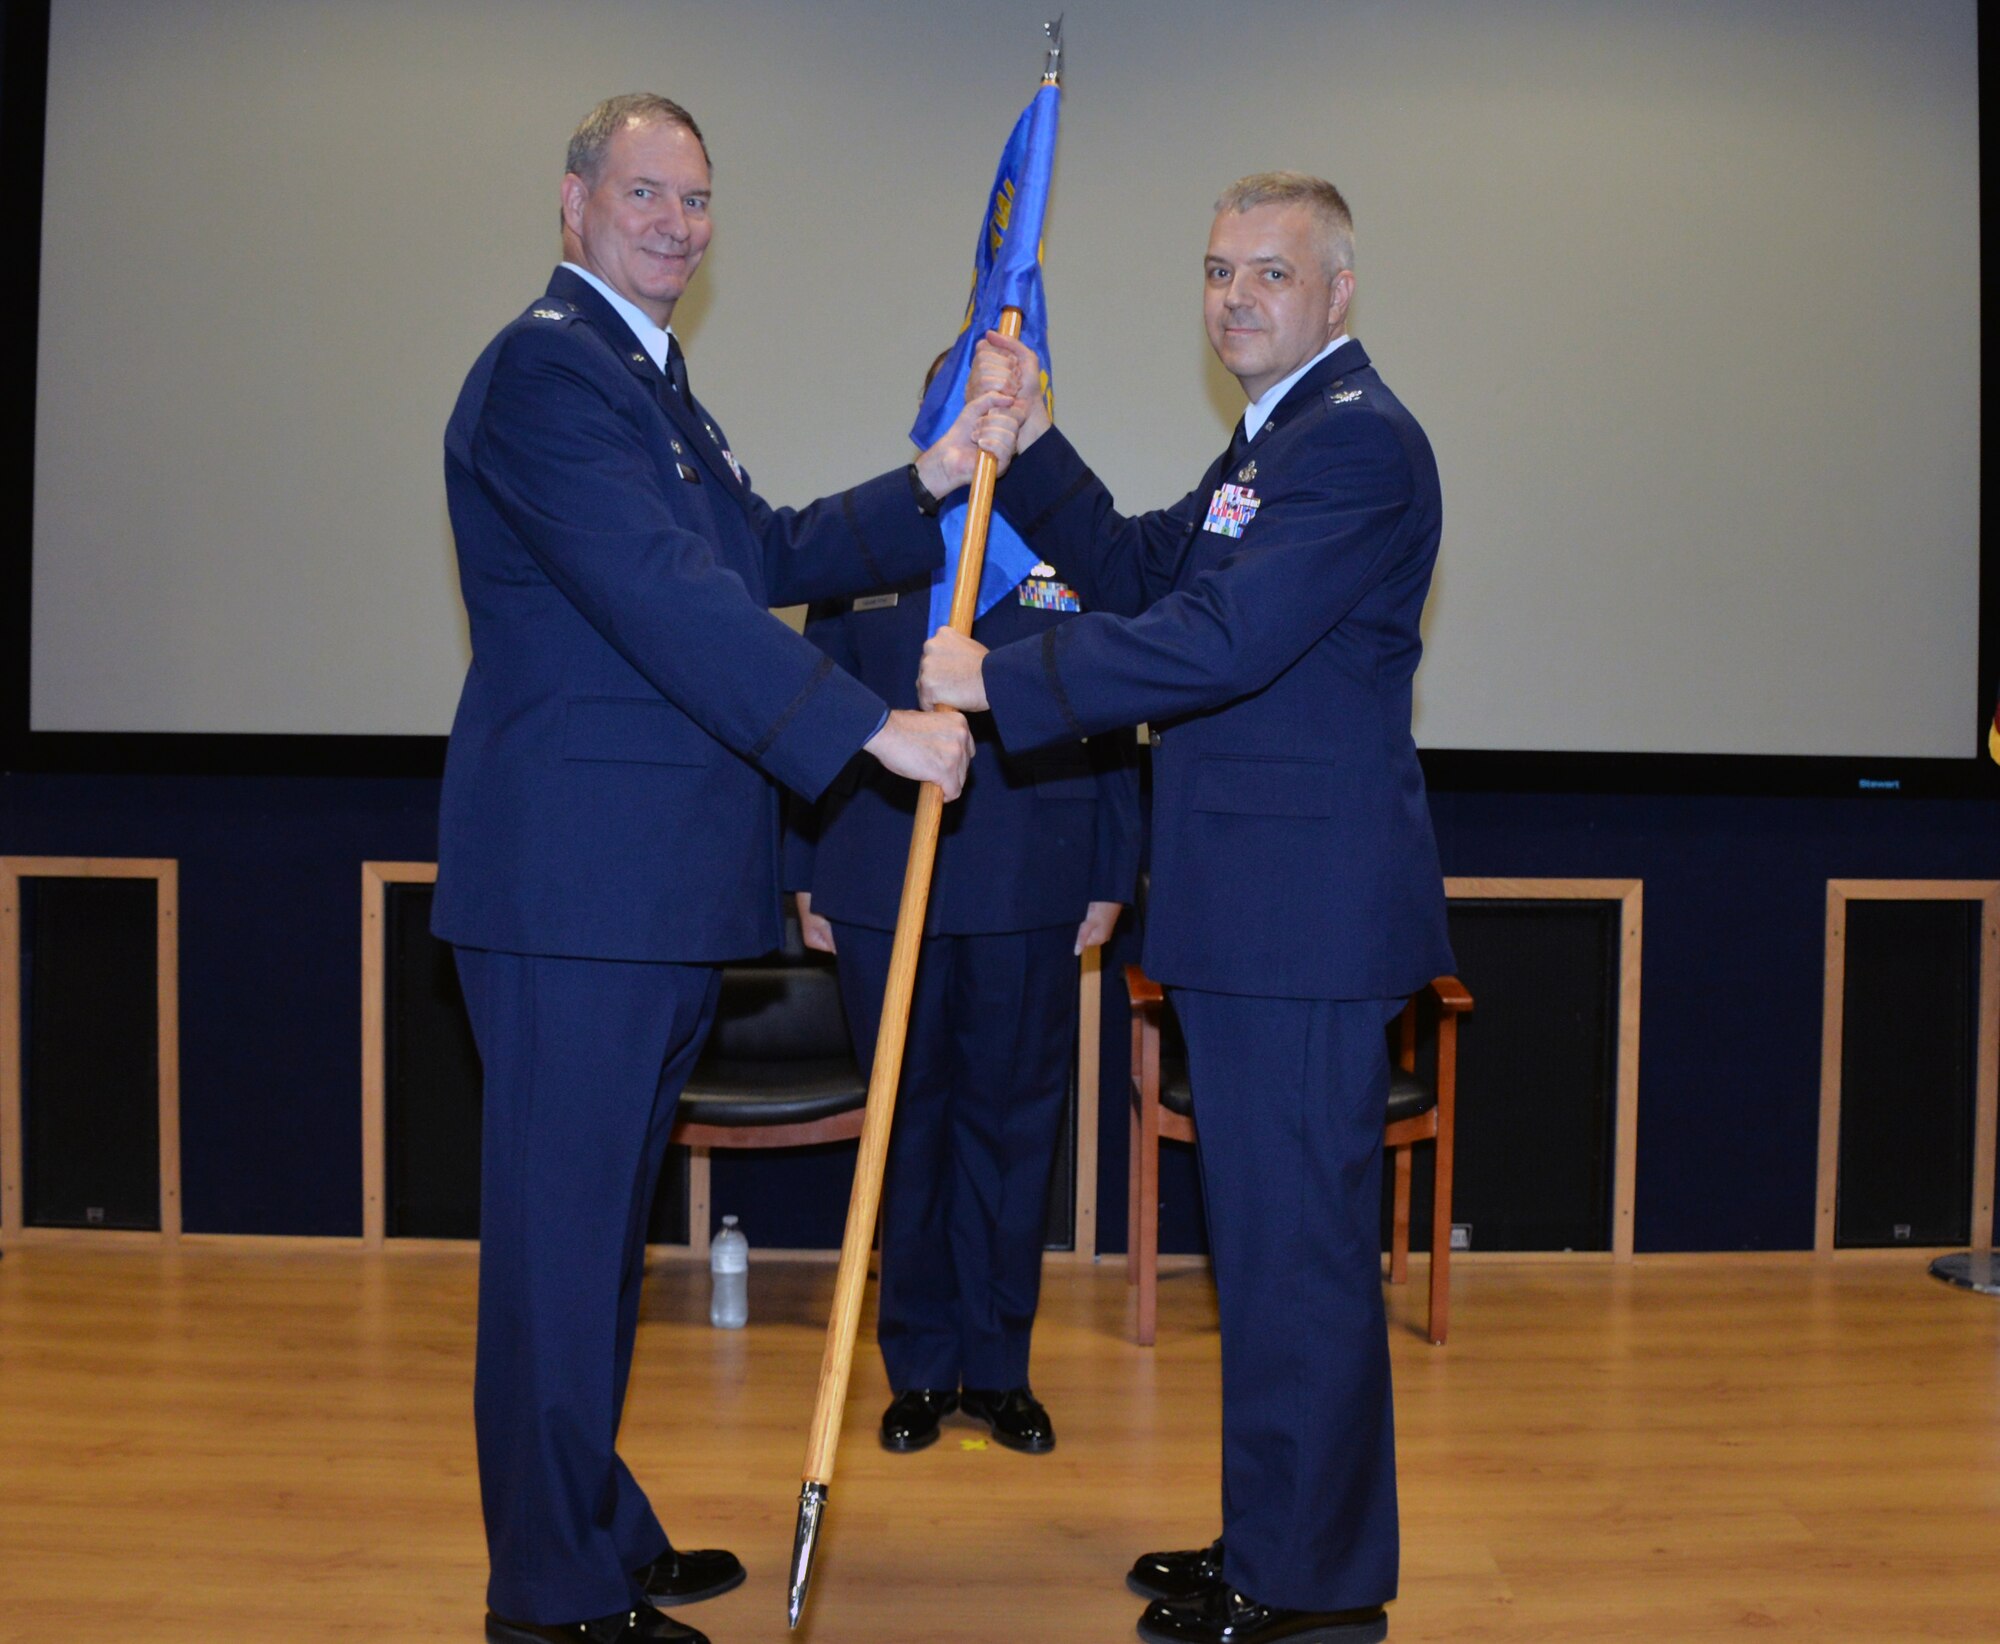 Col. Terry W. McClain, 433rd Airlift Wing commander, presents the 433rd Mission Support Group guidon to Col. Wayne M. Williams as he assumes command at Joint Base San Antonio-Lackland, Texas Sept. 7, 2019.